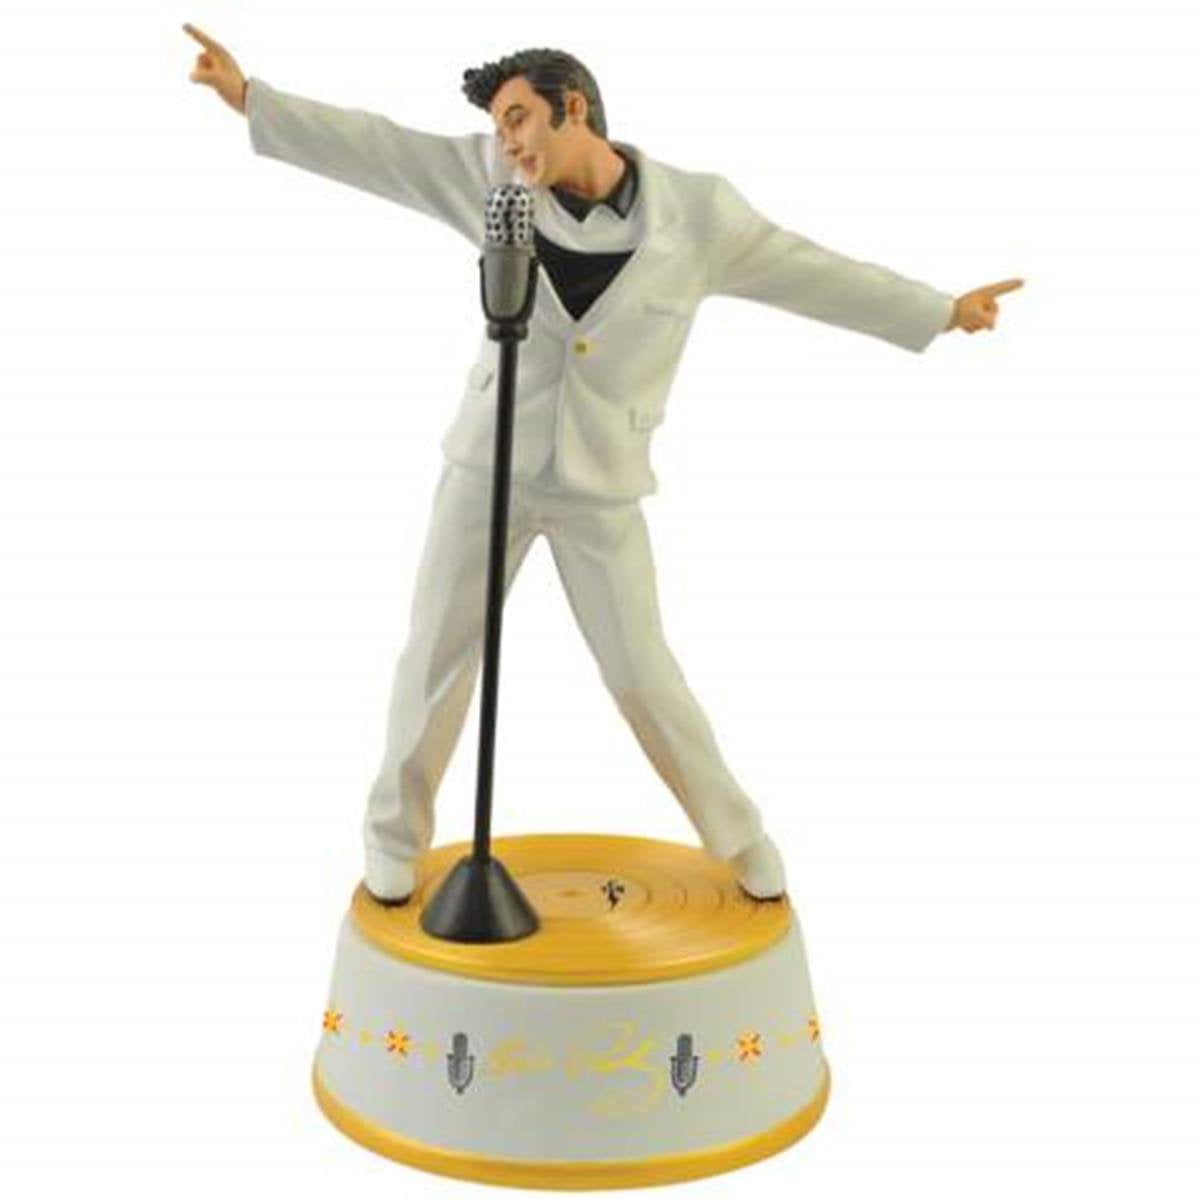 Nylon Exemption Calamity 7.75 Inch Elvis Presley Wearing White Suit with Microphone Figurine -  Walmart.com